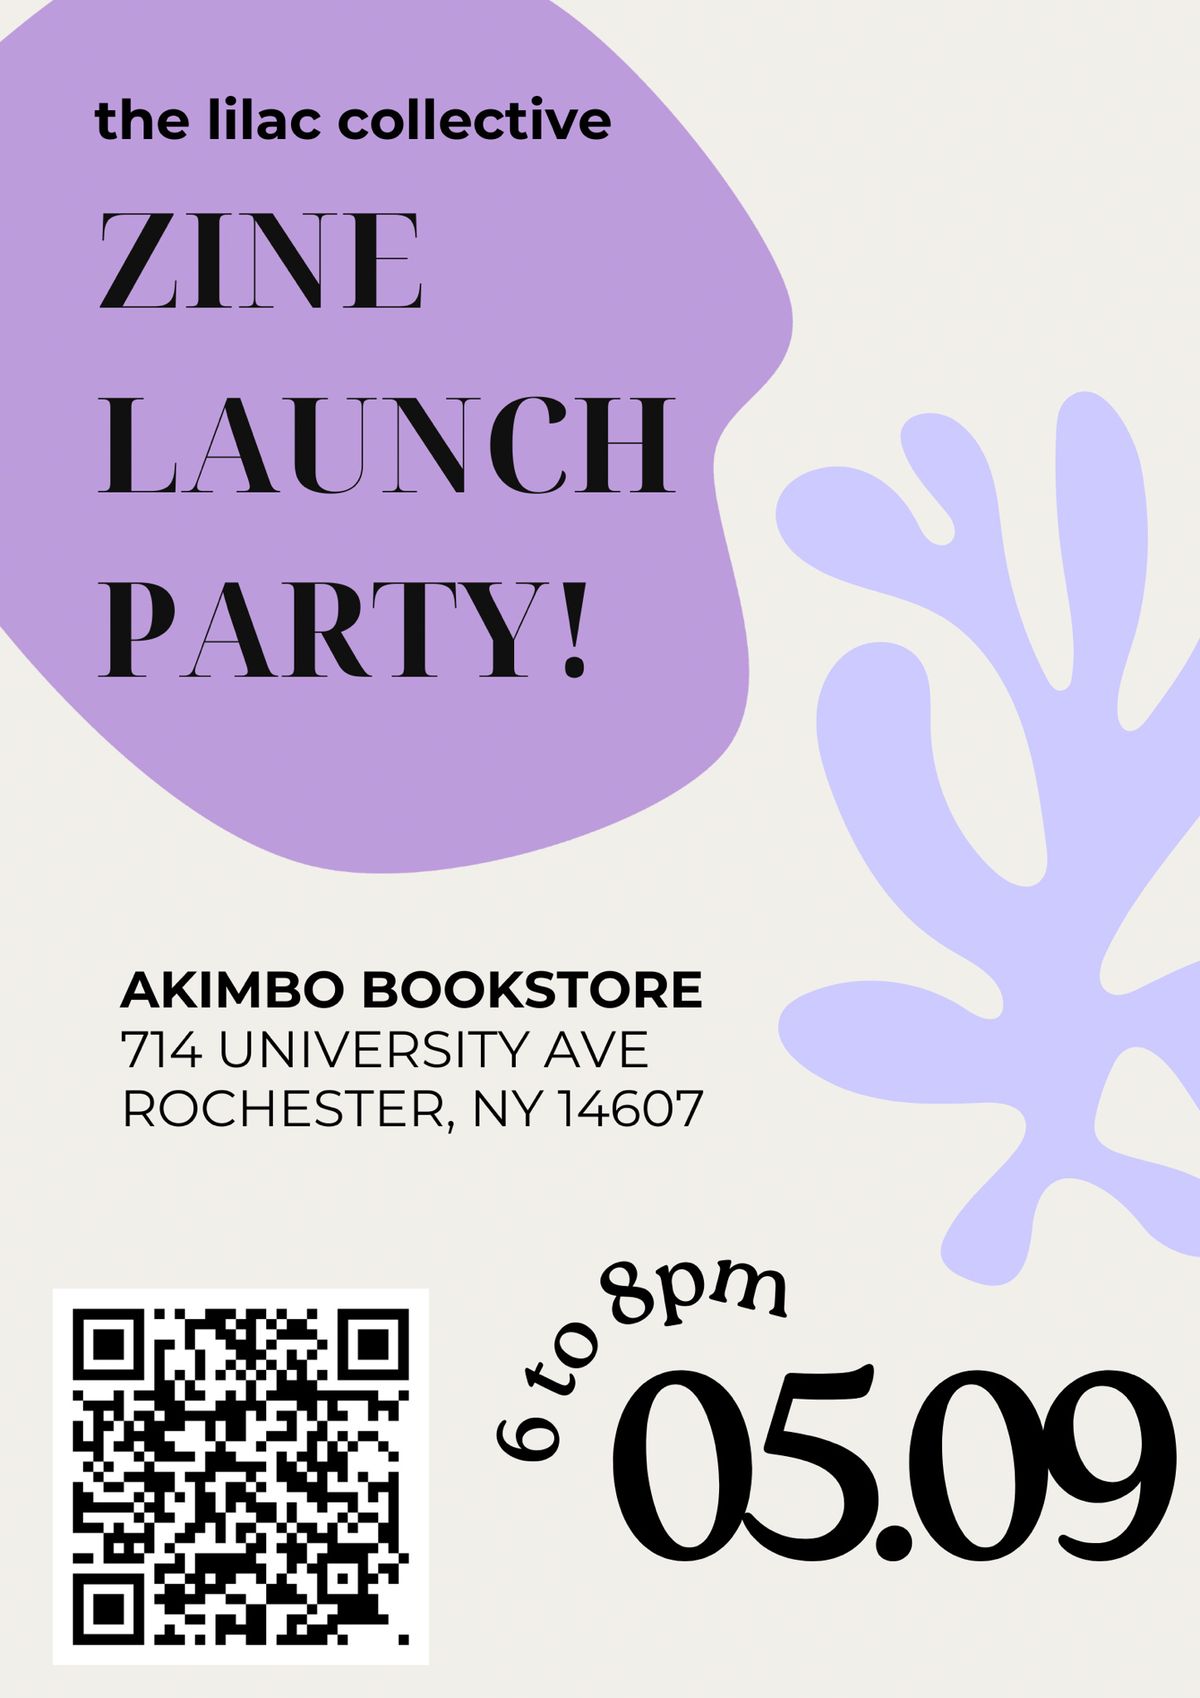 Lilac Collective Zine Launch Party! 